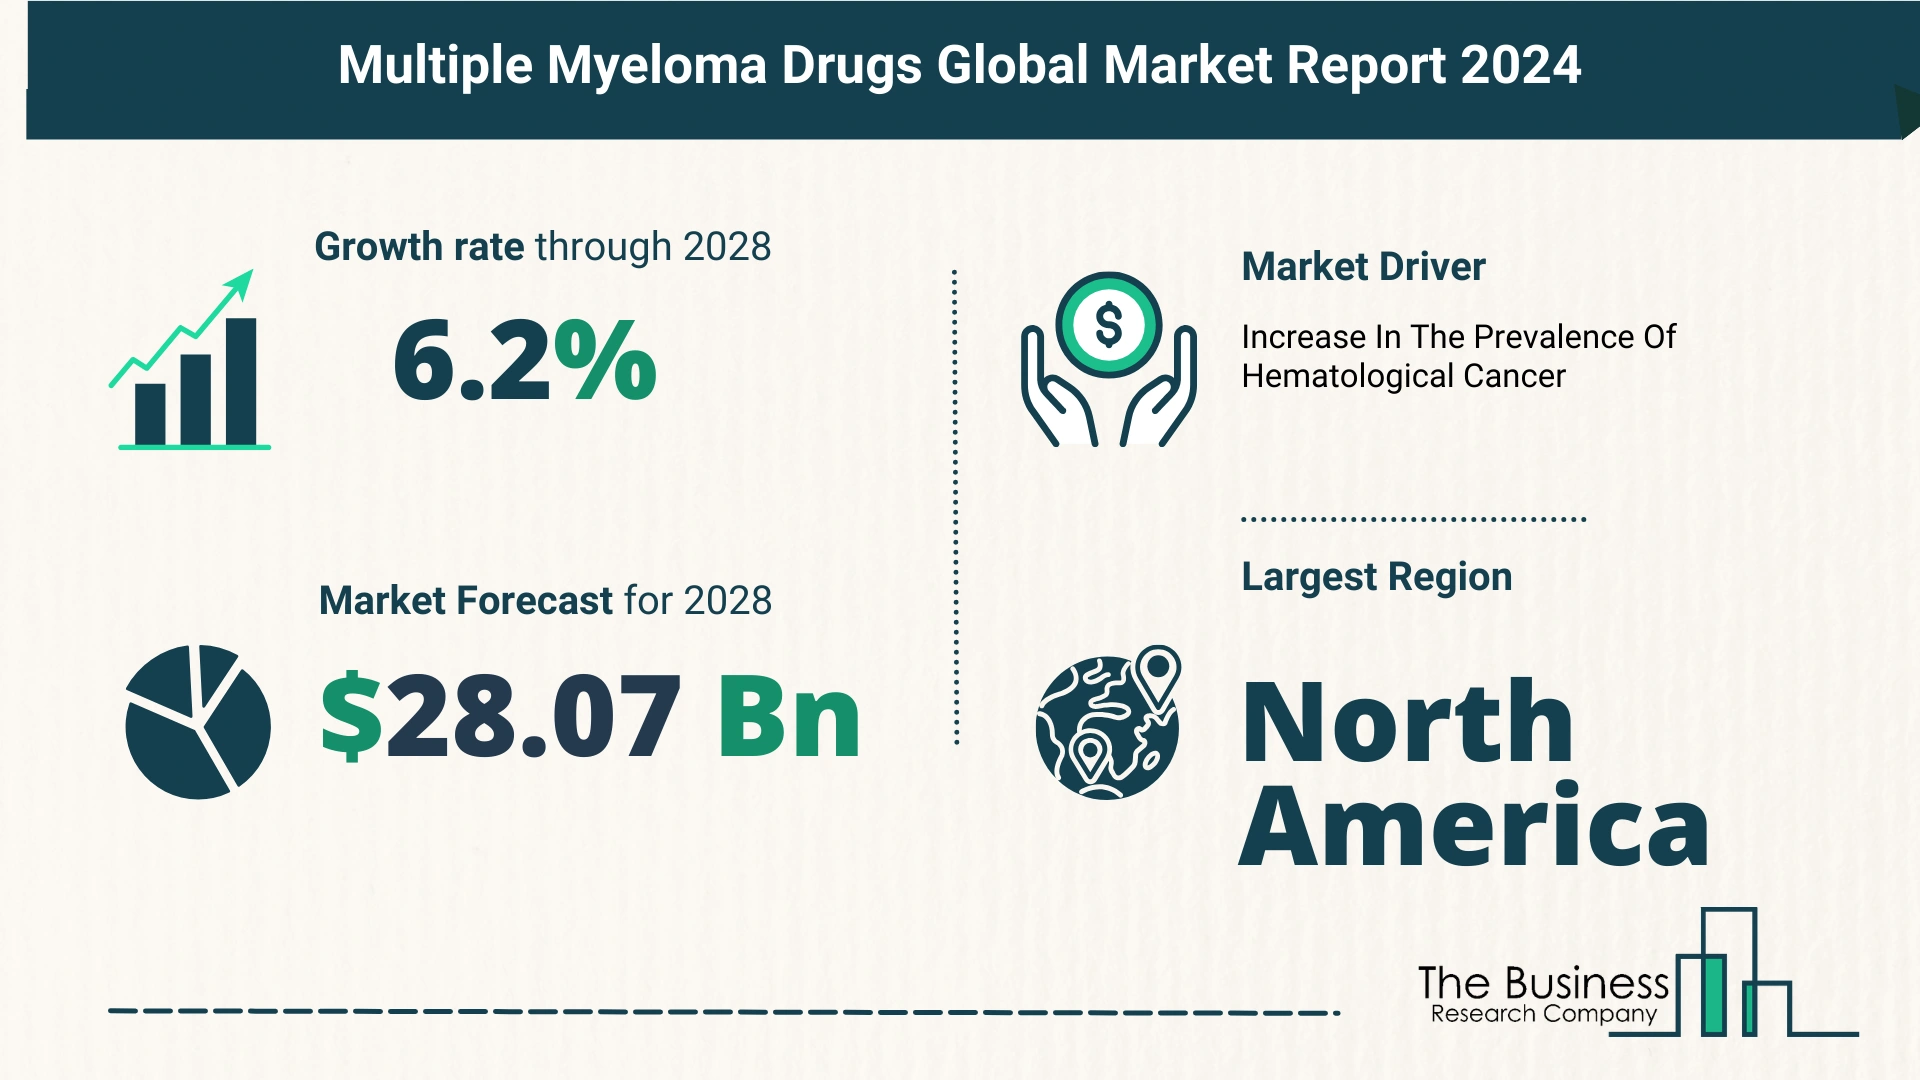 How Is The Multiple Myeloma Drugs Market Expected To Grow Through 2024-2033